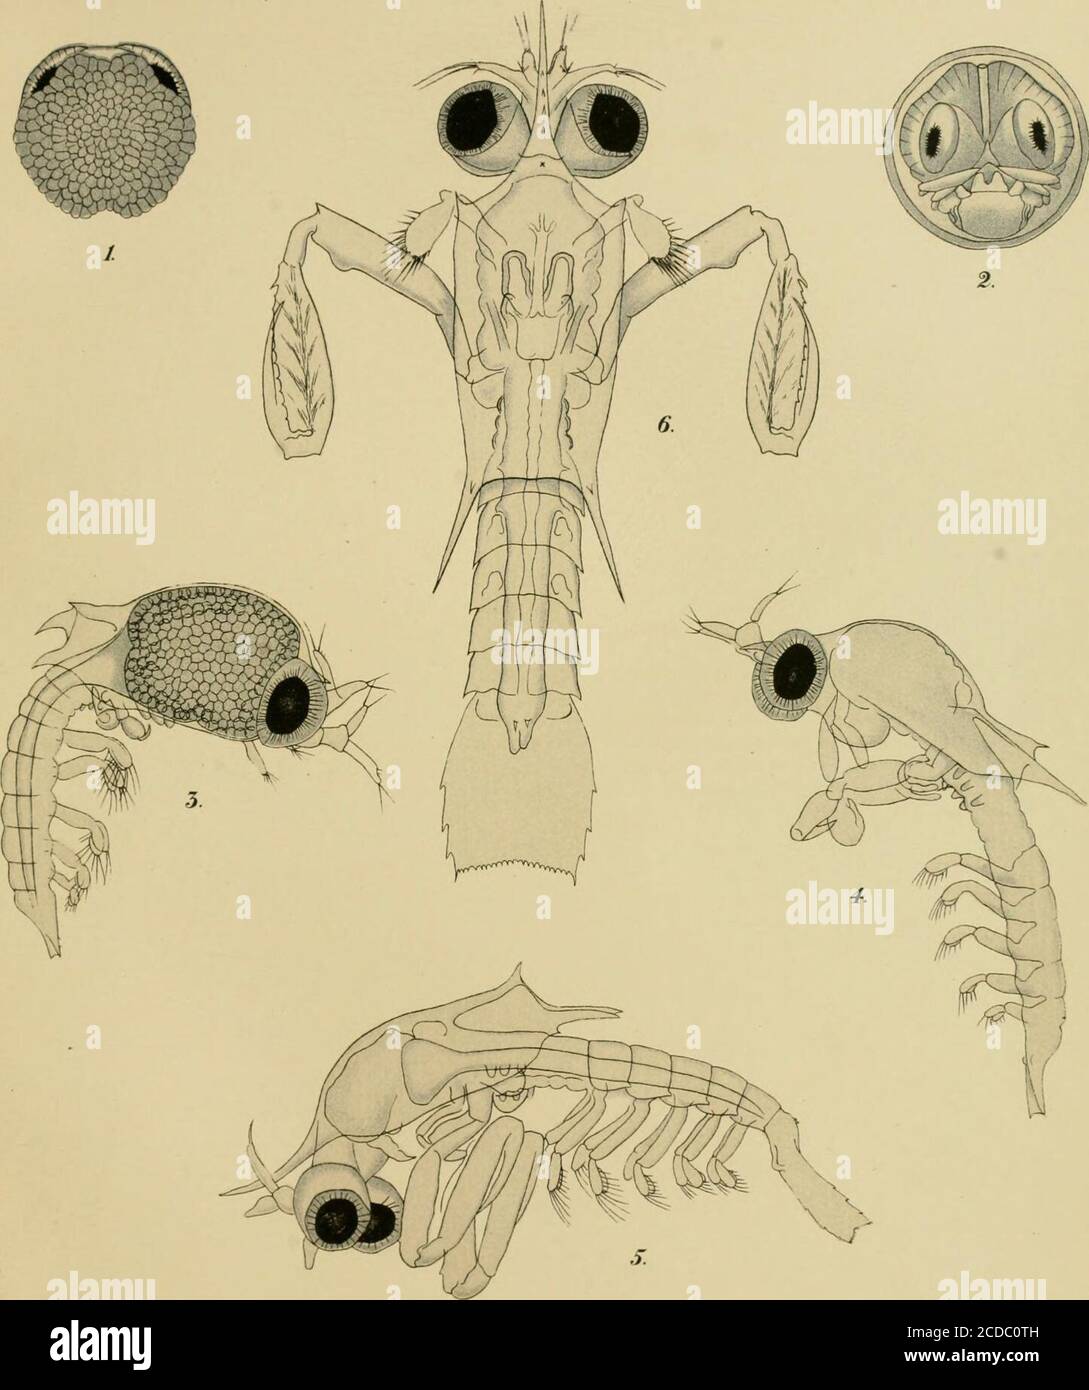 . The embryology and metamorphosis of the Macroura . Fi^.44. FH Heiri^k.del. STENOPUS HISPIDUS. SwtBb«JtaMUrfCnfha(tb|i»TM 490 MEMOIRS OP THE NATIONAL ACADEMY OF SCIENCES. Plate XIV. Metamorphosis of Gonodactylus chiragra, drawn from life by W. K. Brooks. Fig. 1. Dorsal view of egg just befere hatching. Fig. 2. Front view of the same egg. Fig. 3. Side view of the larva immediately after hatching. Fig. 4. Side view of the same larva after the first molt. Fig. 5. Side view of the same larva after tlie second molt. Fig. 6. Dorsal view of the larva at the beginning of its pelagic life. PLate XIV.. Stock Photo